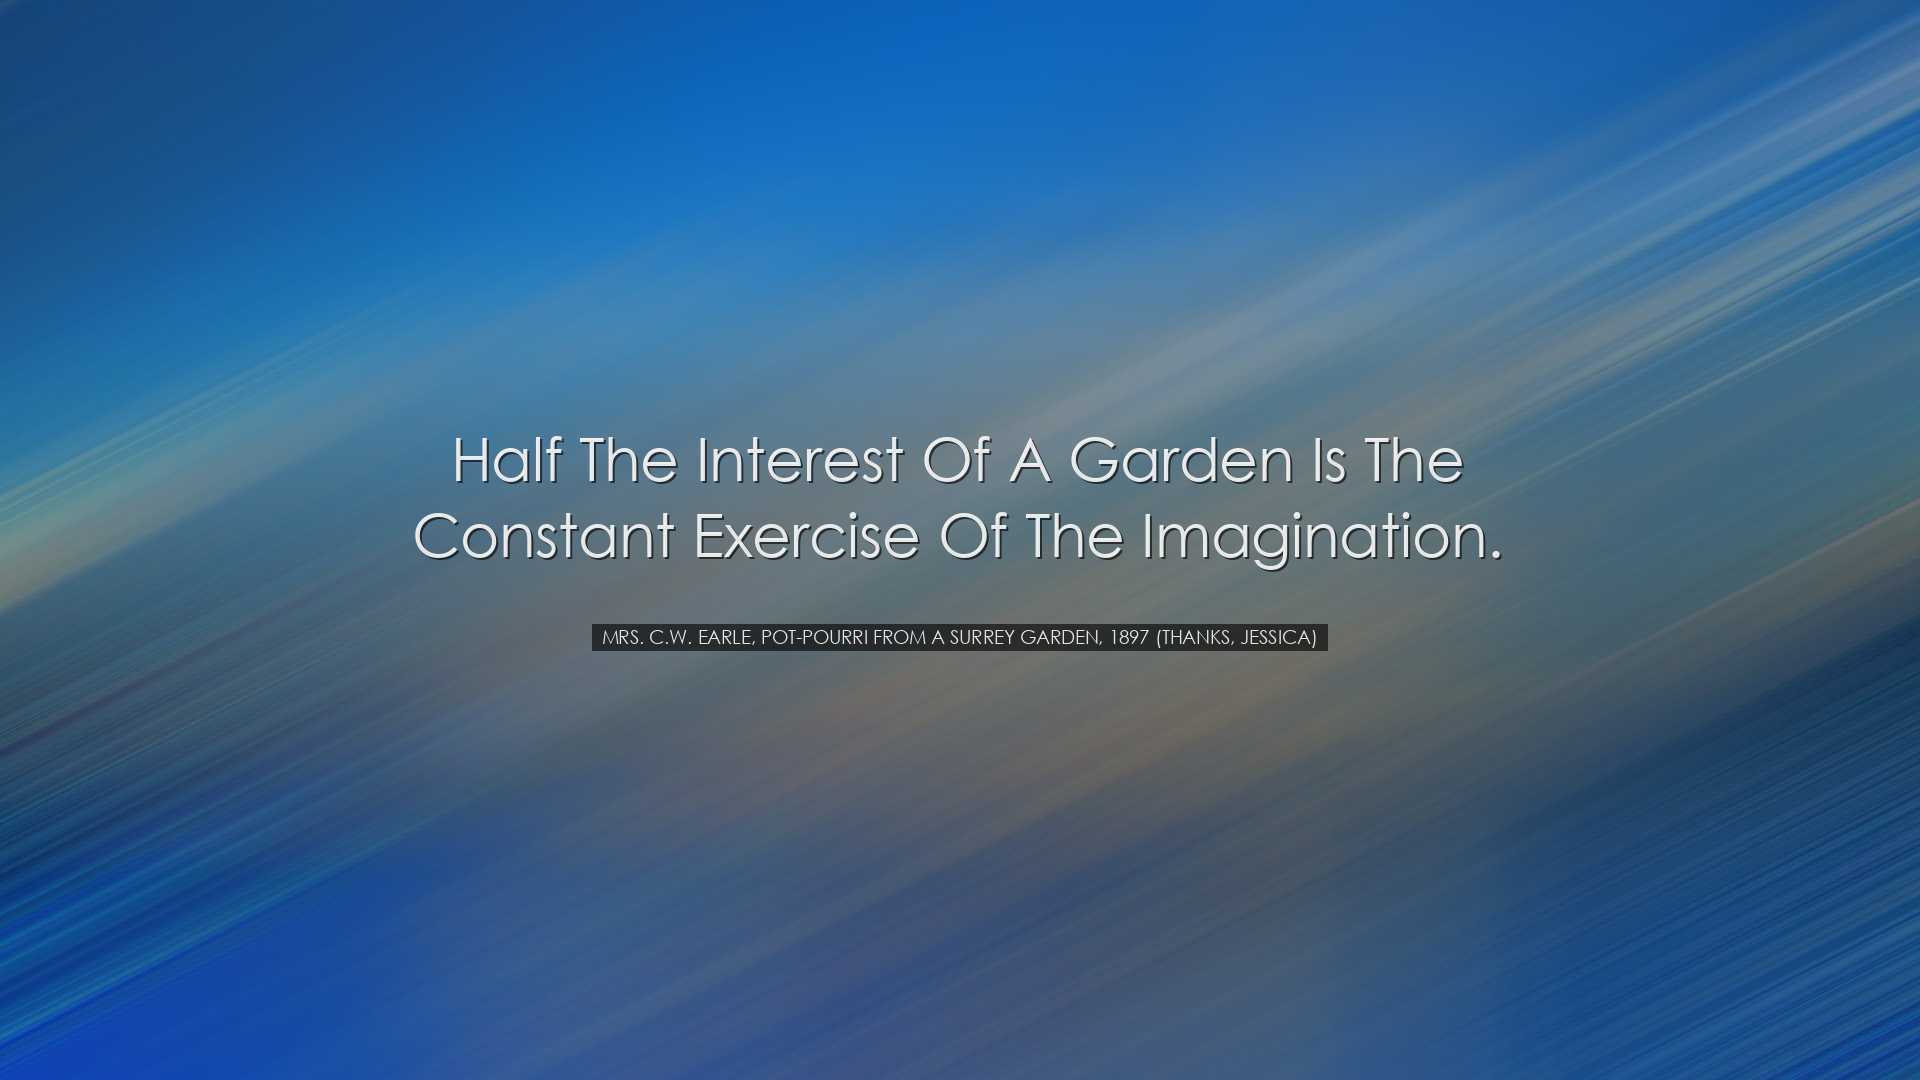 Half the interest of a garden is the constant exercise of the imag